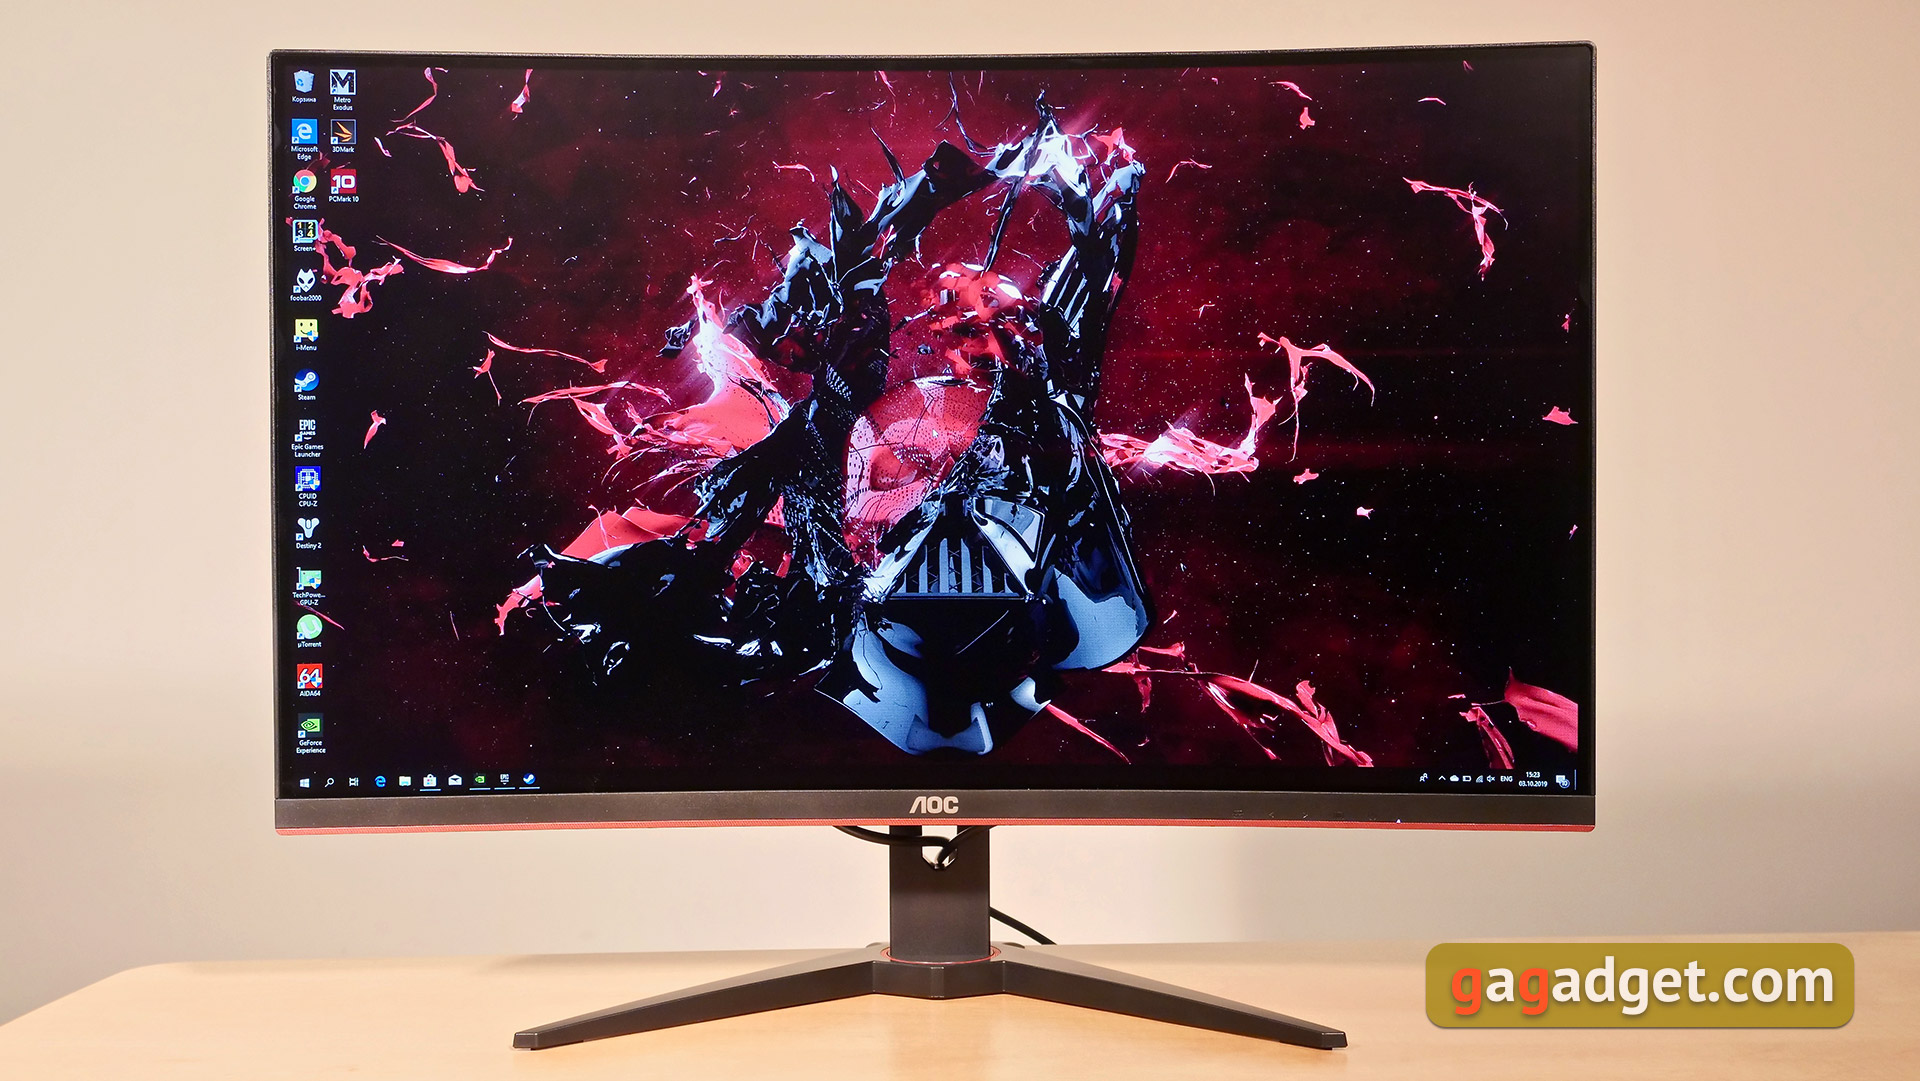 Aoc Cq32g1 Review 32 Inch Curved Gaming Monitor With 144 Hz Geek Tech Online